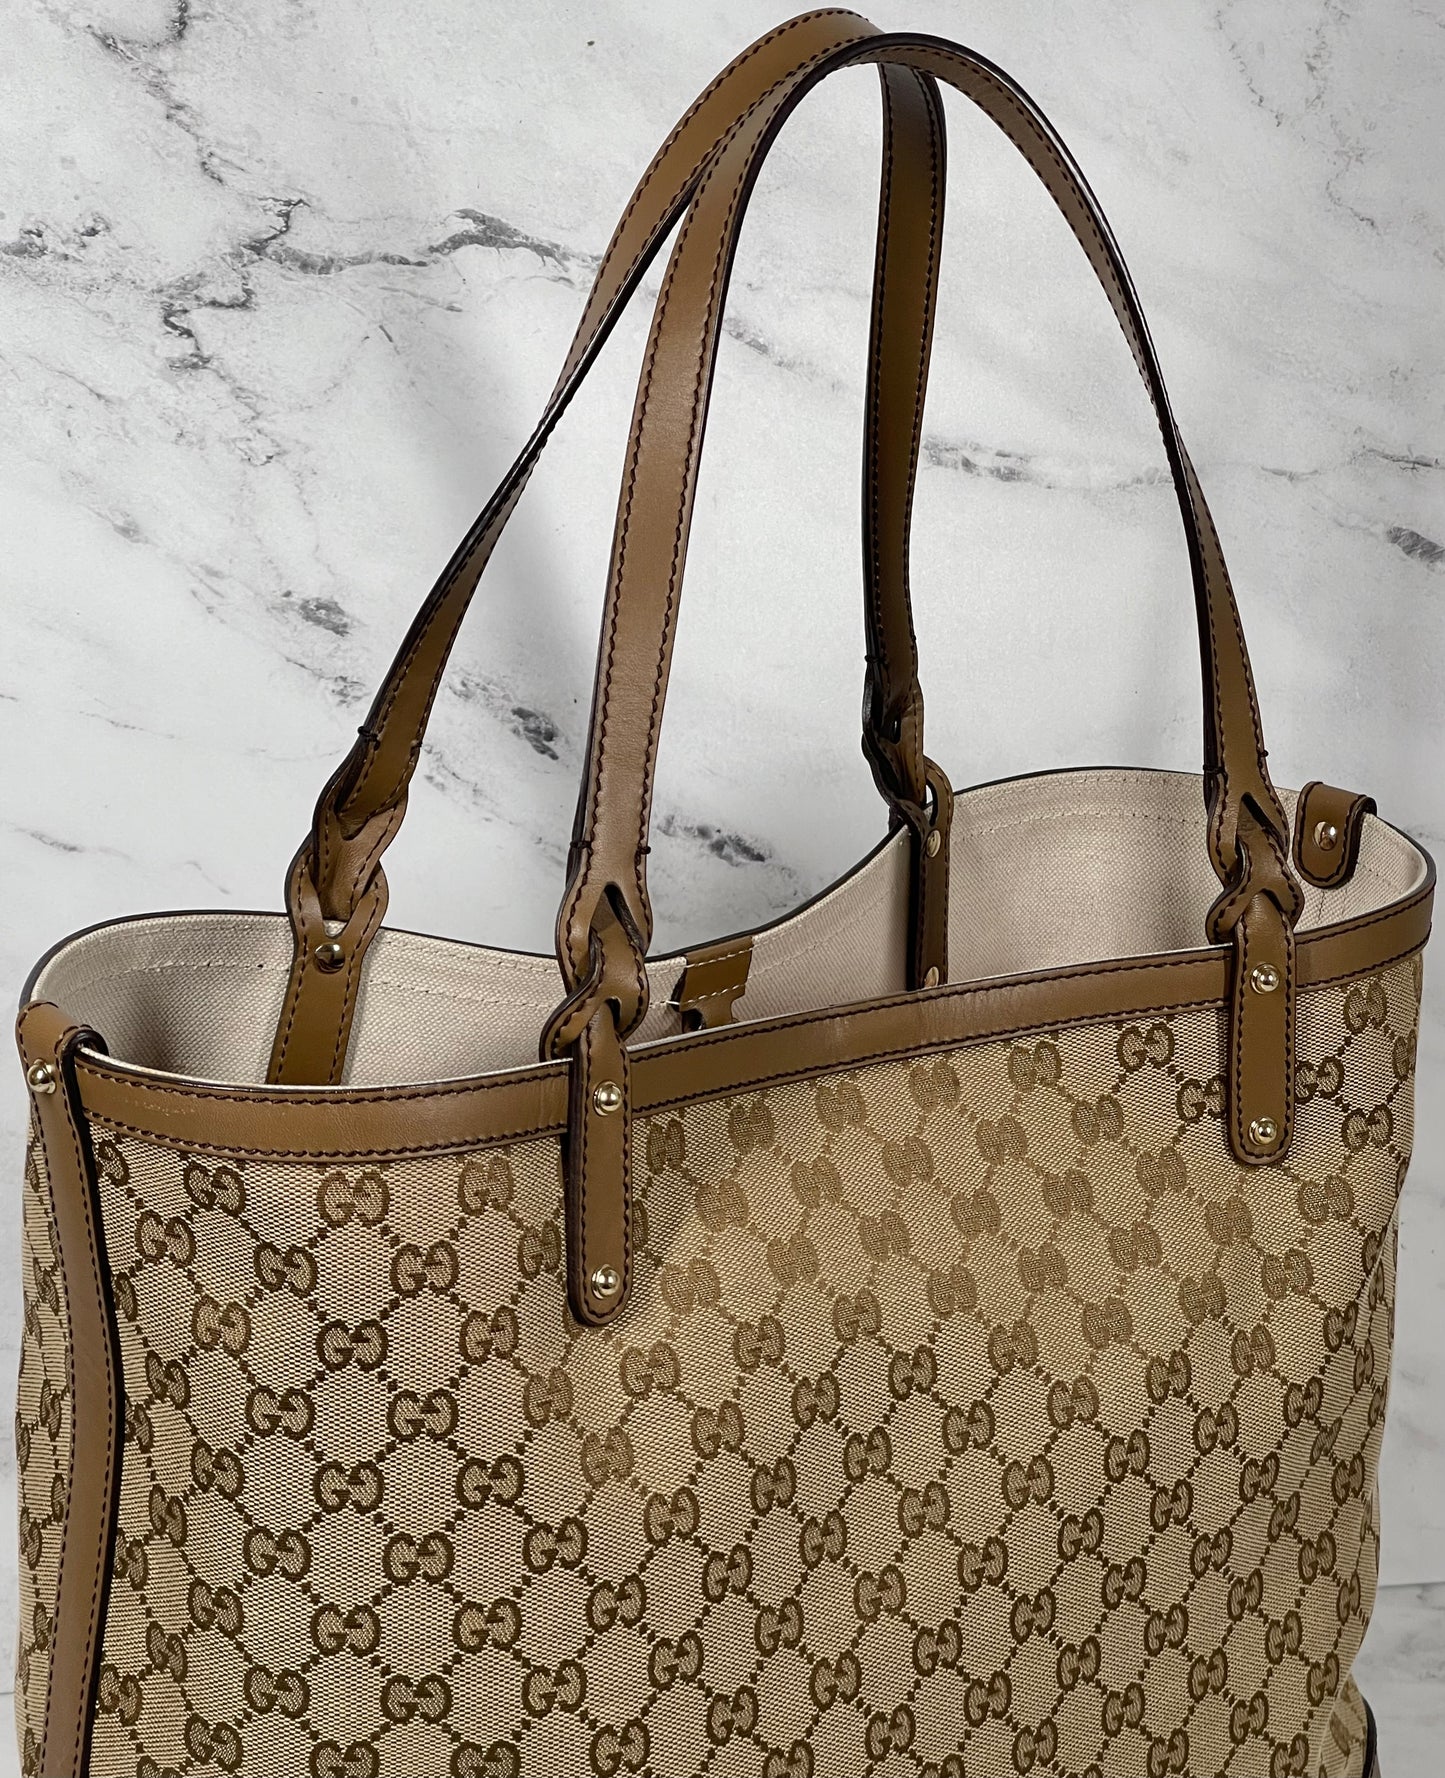 Gucci Brown GG Monogram Canvas & Leather Shoulder Tote Bag w Pouch